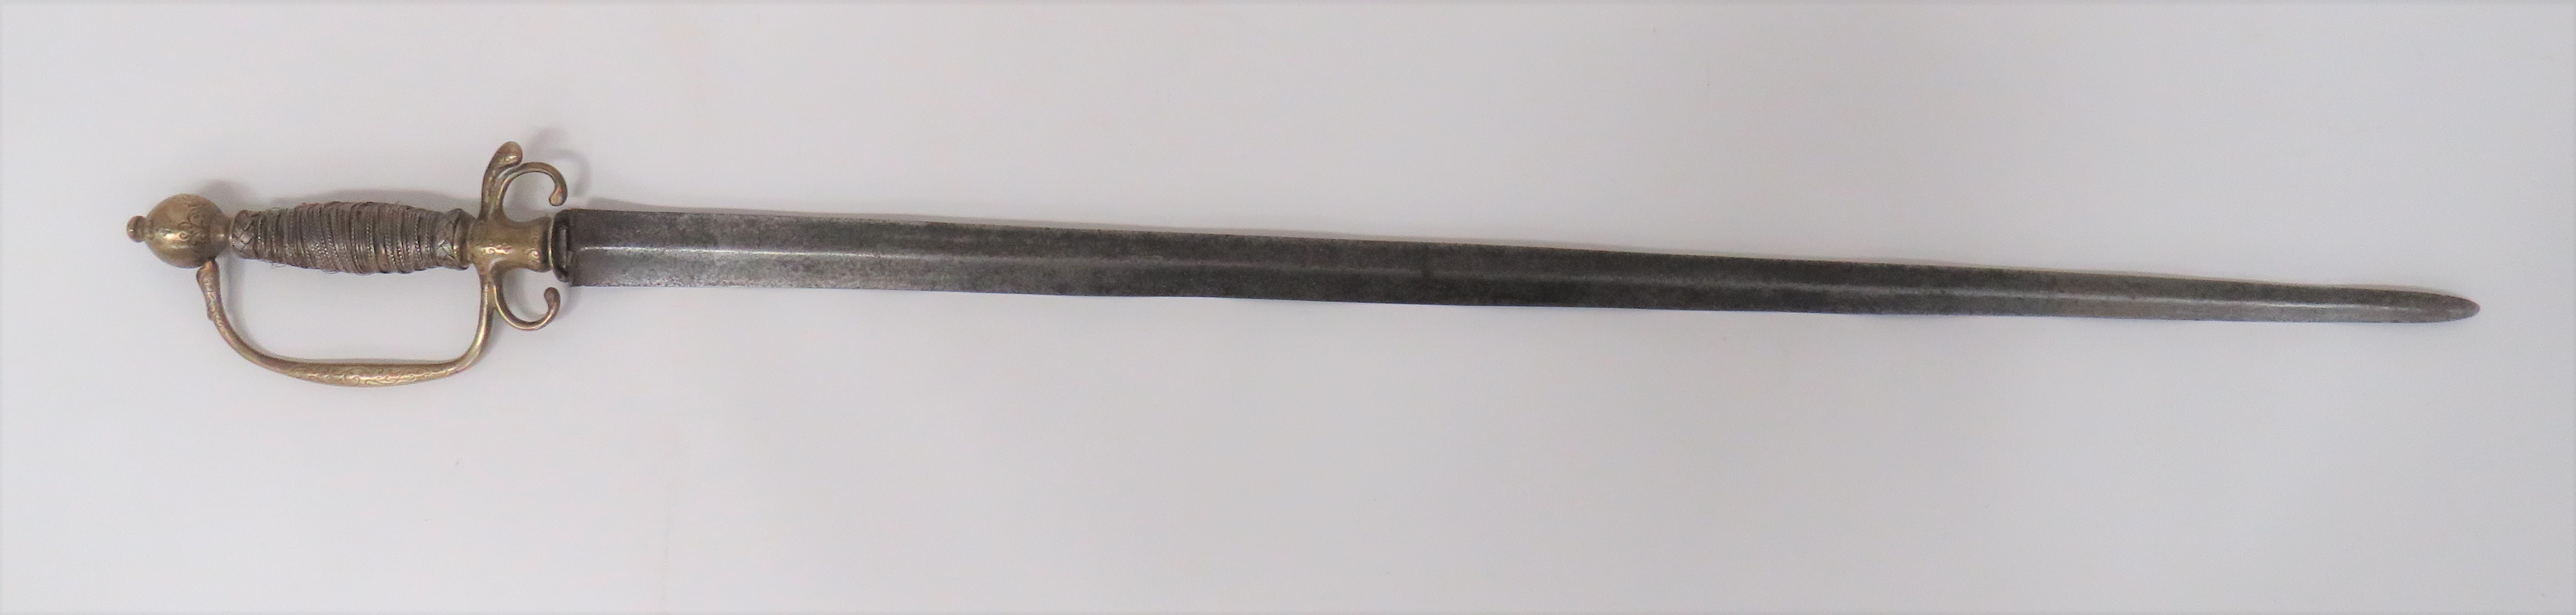 Mid 18th Century Officer's Sword 29 1/2 inch, double edged, fighting blade.  Brass pas-d'ane,